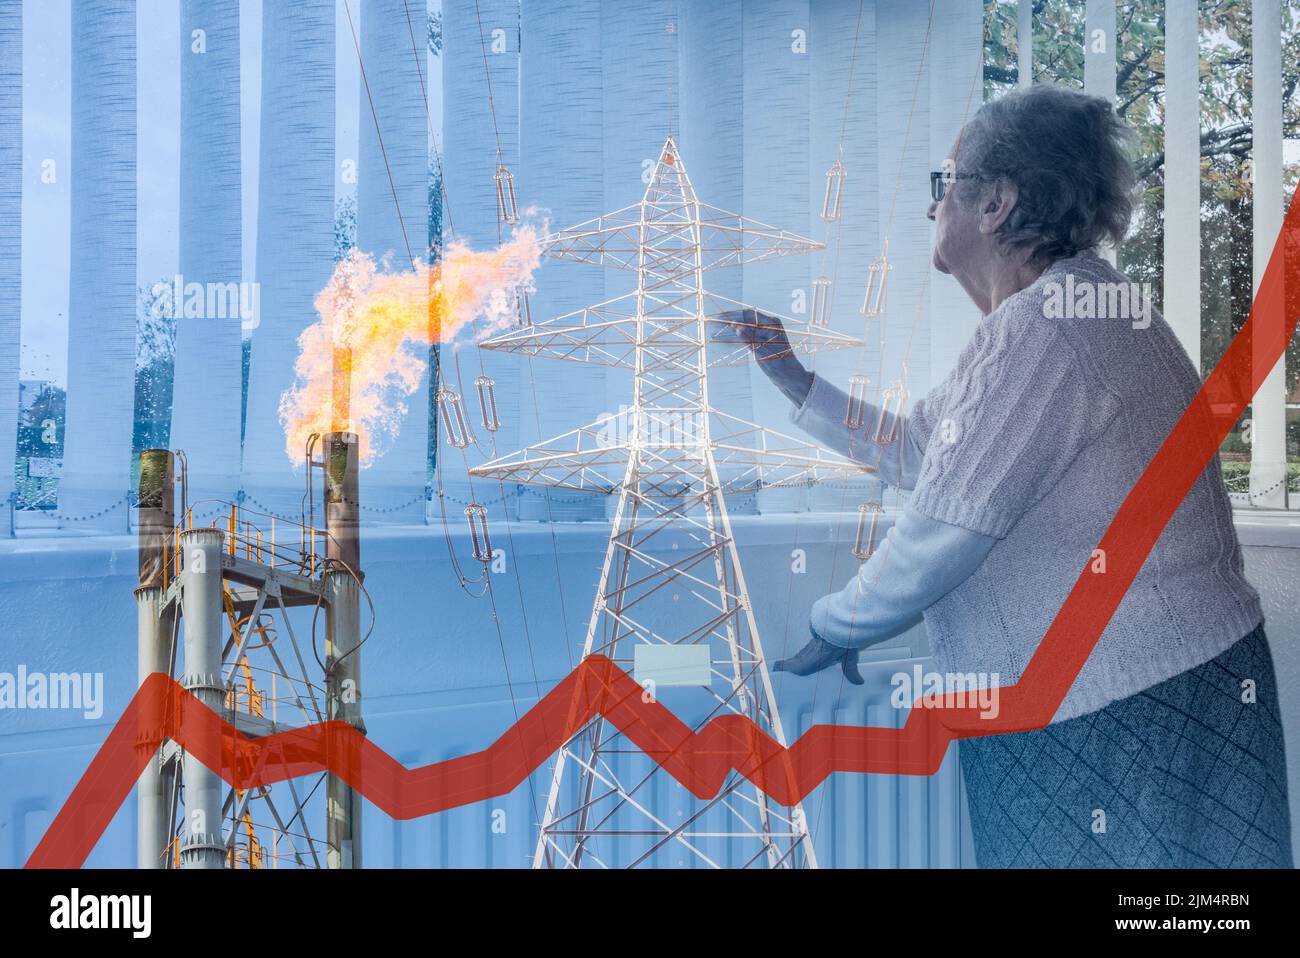 90 year old woman looking out of window with hand on radiator. Electricity pylon and industrial gas flare chimney image blended. energy crisis concept Stock Photo